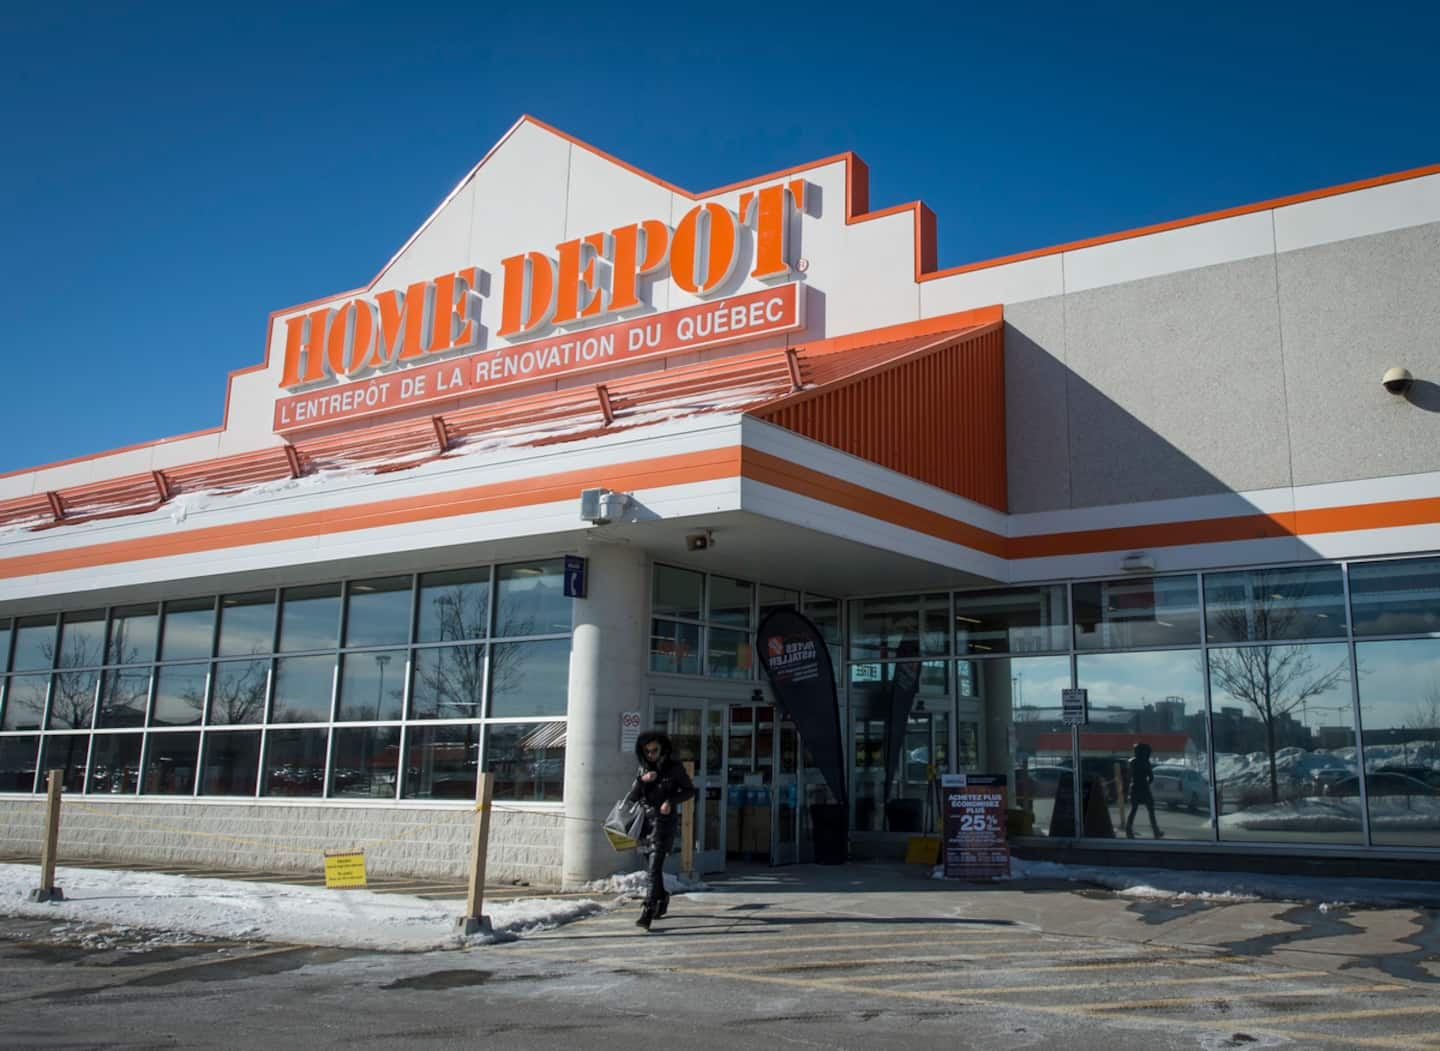 “No one wants to work anymore!”: The Home Depot founder empties his bag